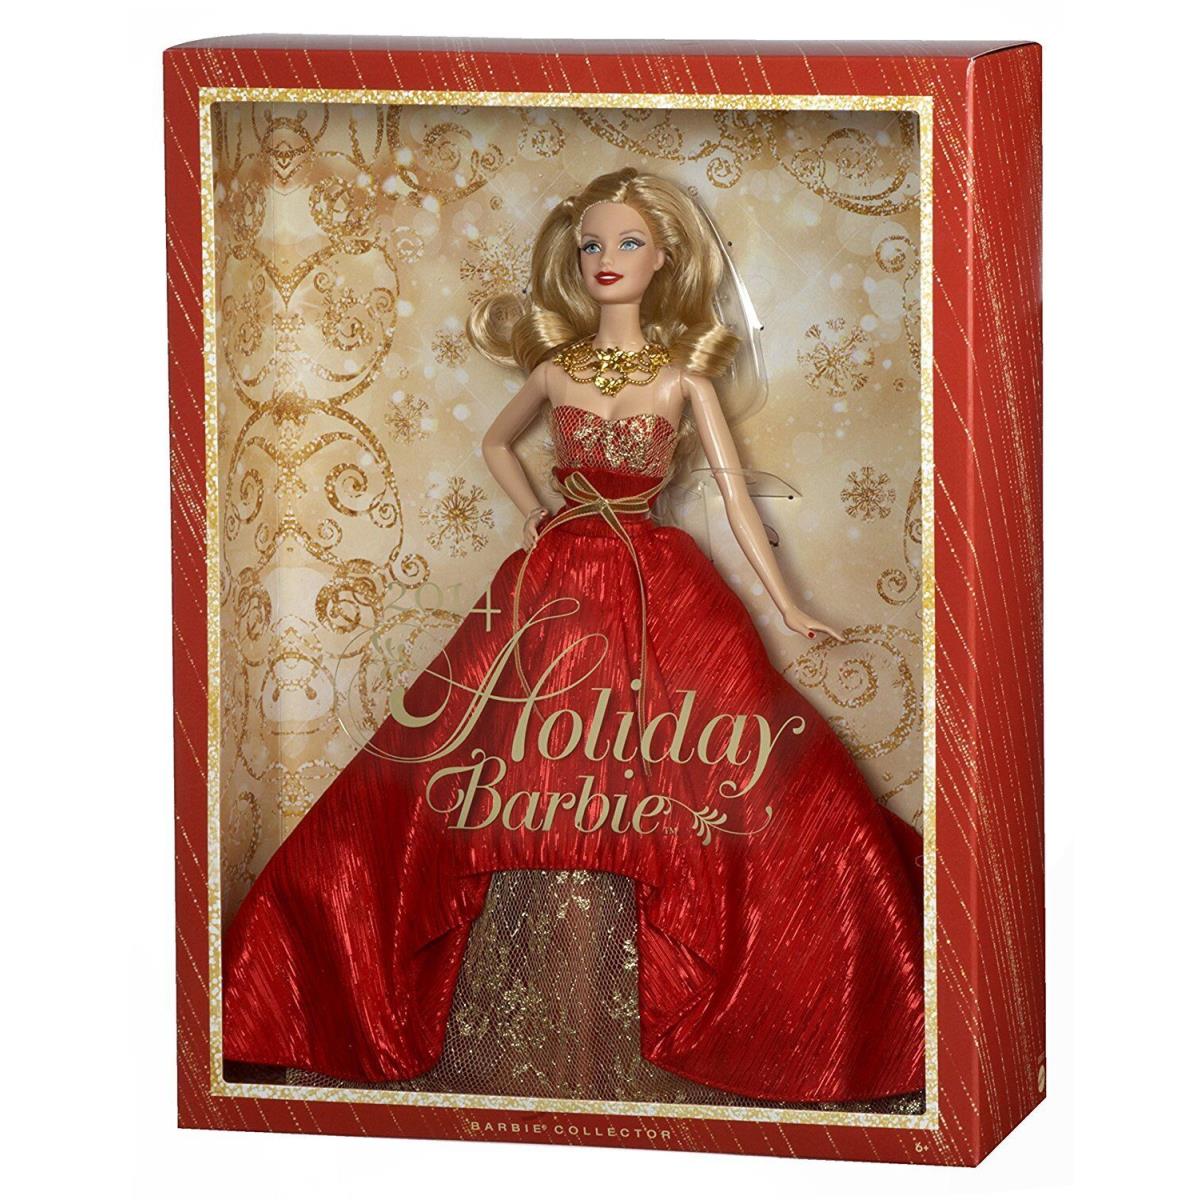 Barbie Collector 2014 Holiday Doll by Manufacturer